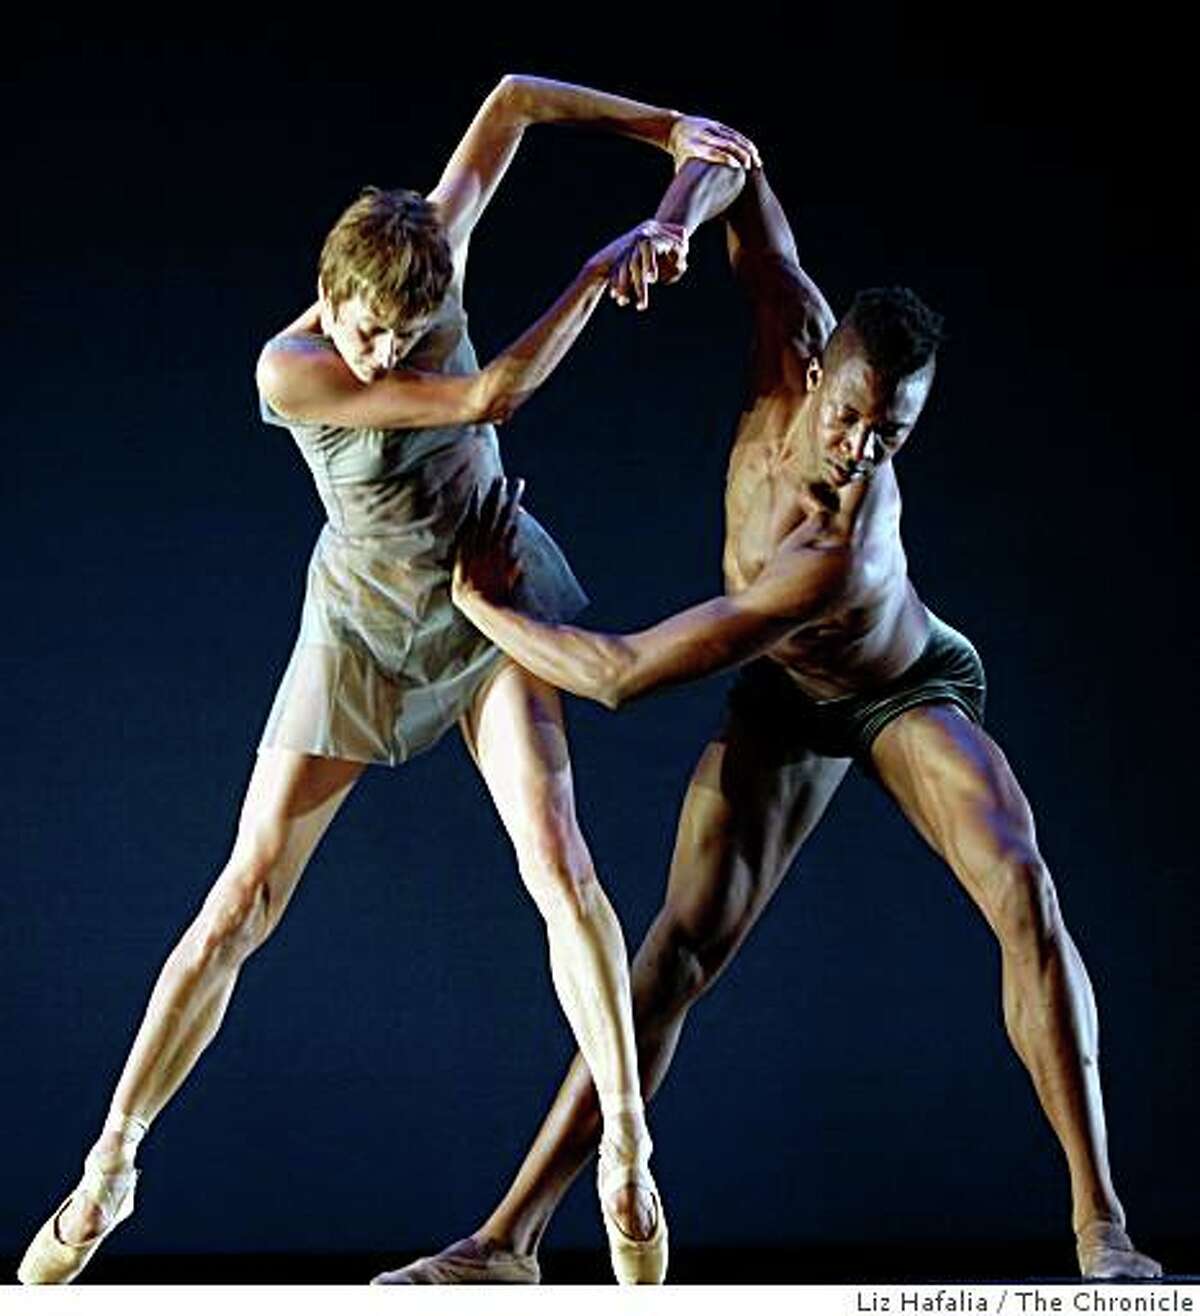 Muriel Maffre and Corey Scott-Gilbert performing in "The Steady Articulation of Perserverence" in the Lines Ballet in a dress rehearsal of the world premiere in San Francisco, Calif., in Yerba Buena Center on Thursday, October 16, 2008.